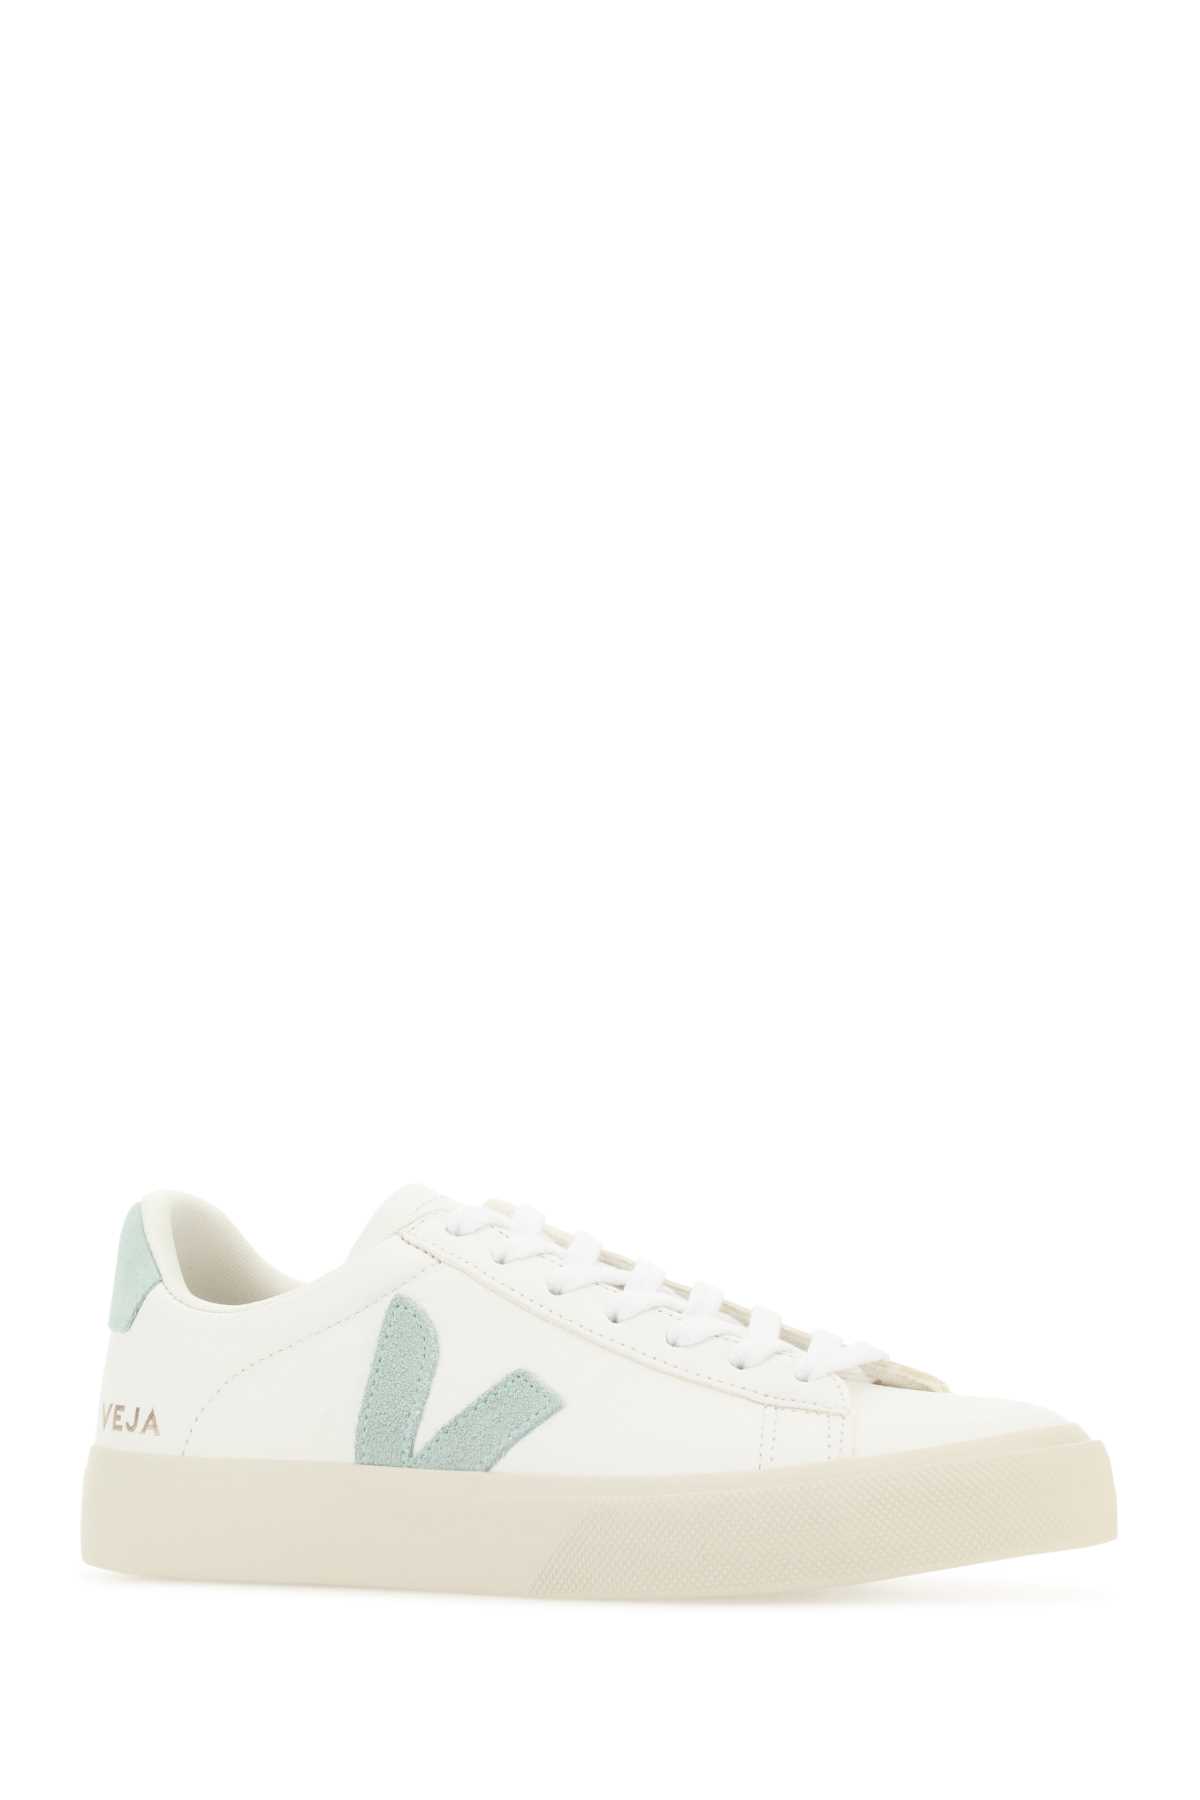 Shop Veja White Chromefree Leather Campo Sneakers In Extrawhitematcha